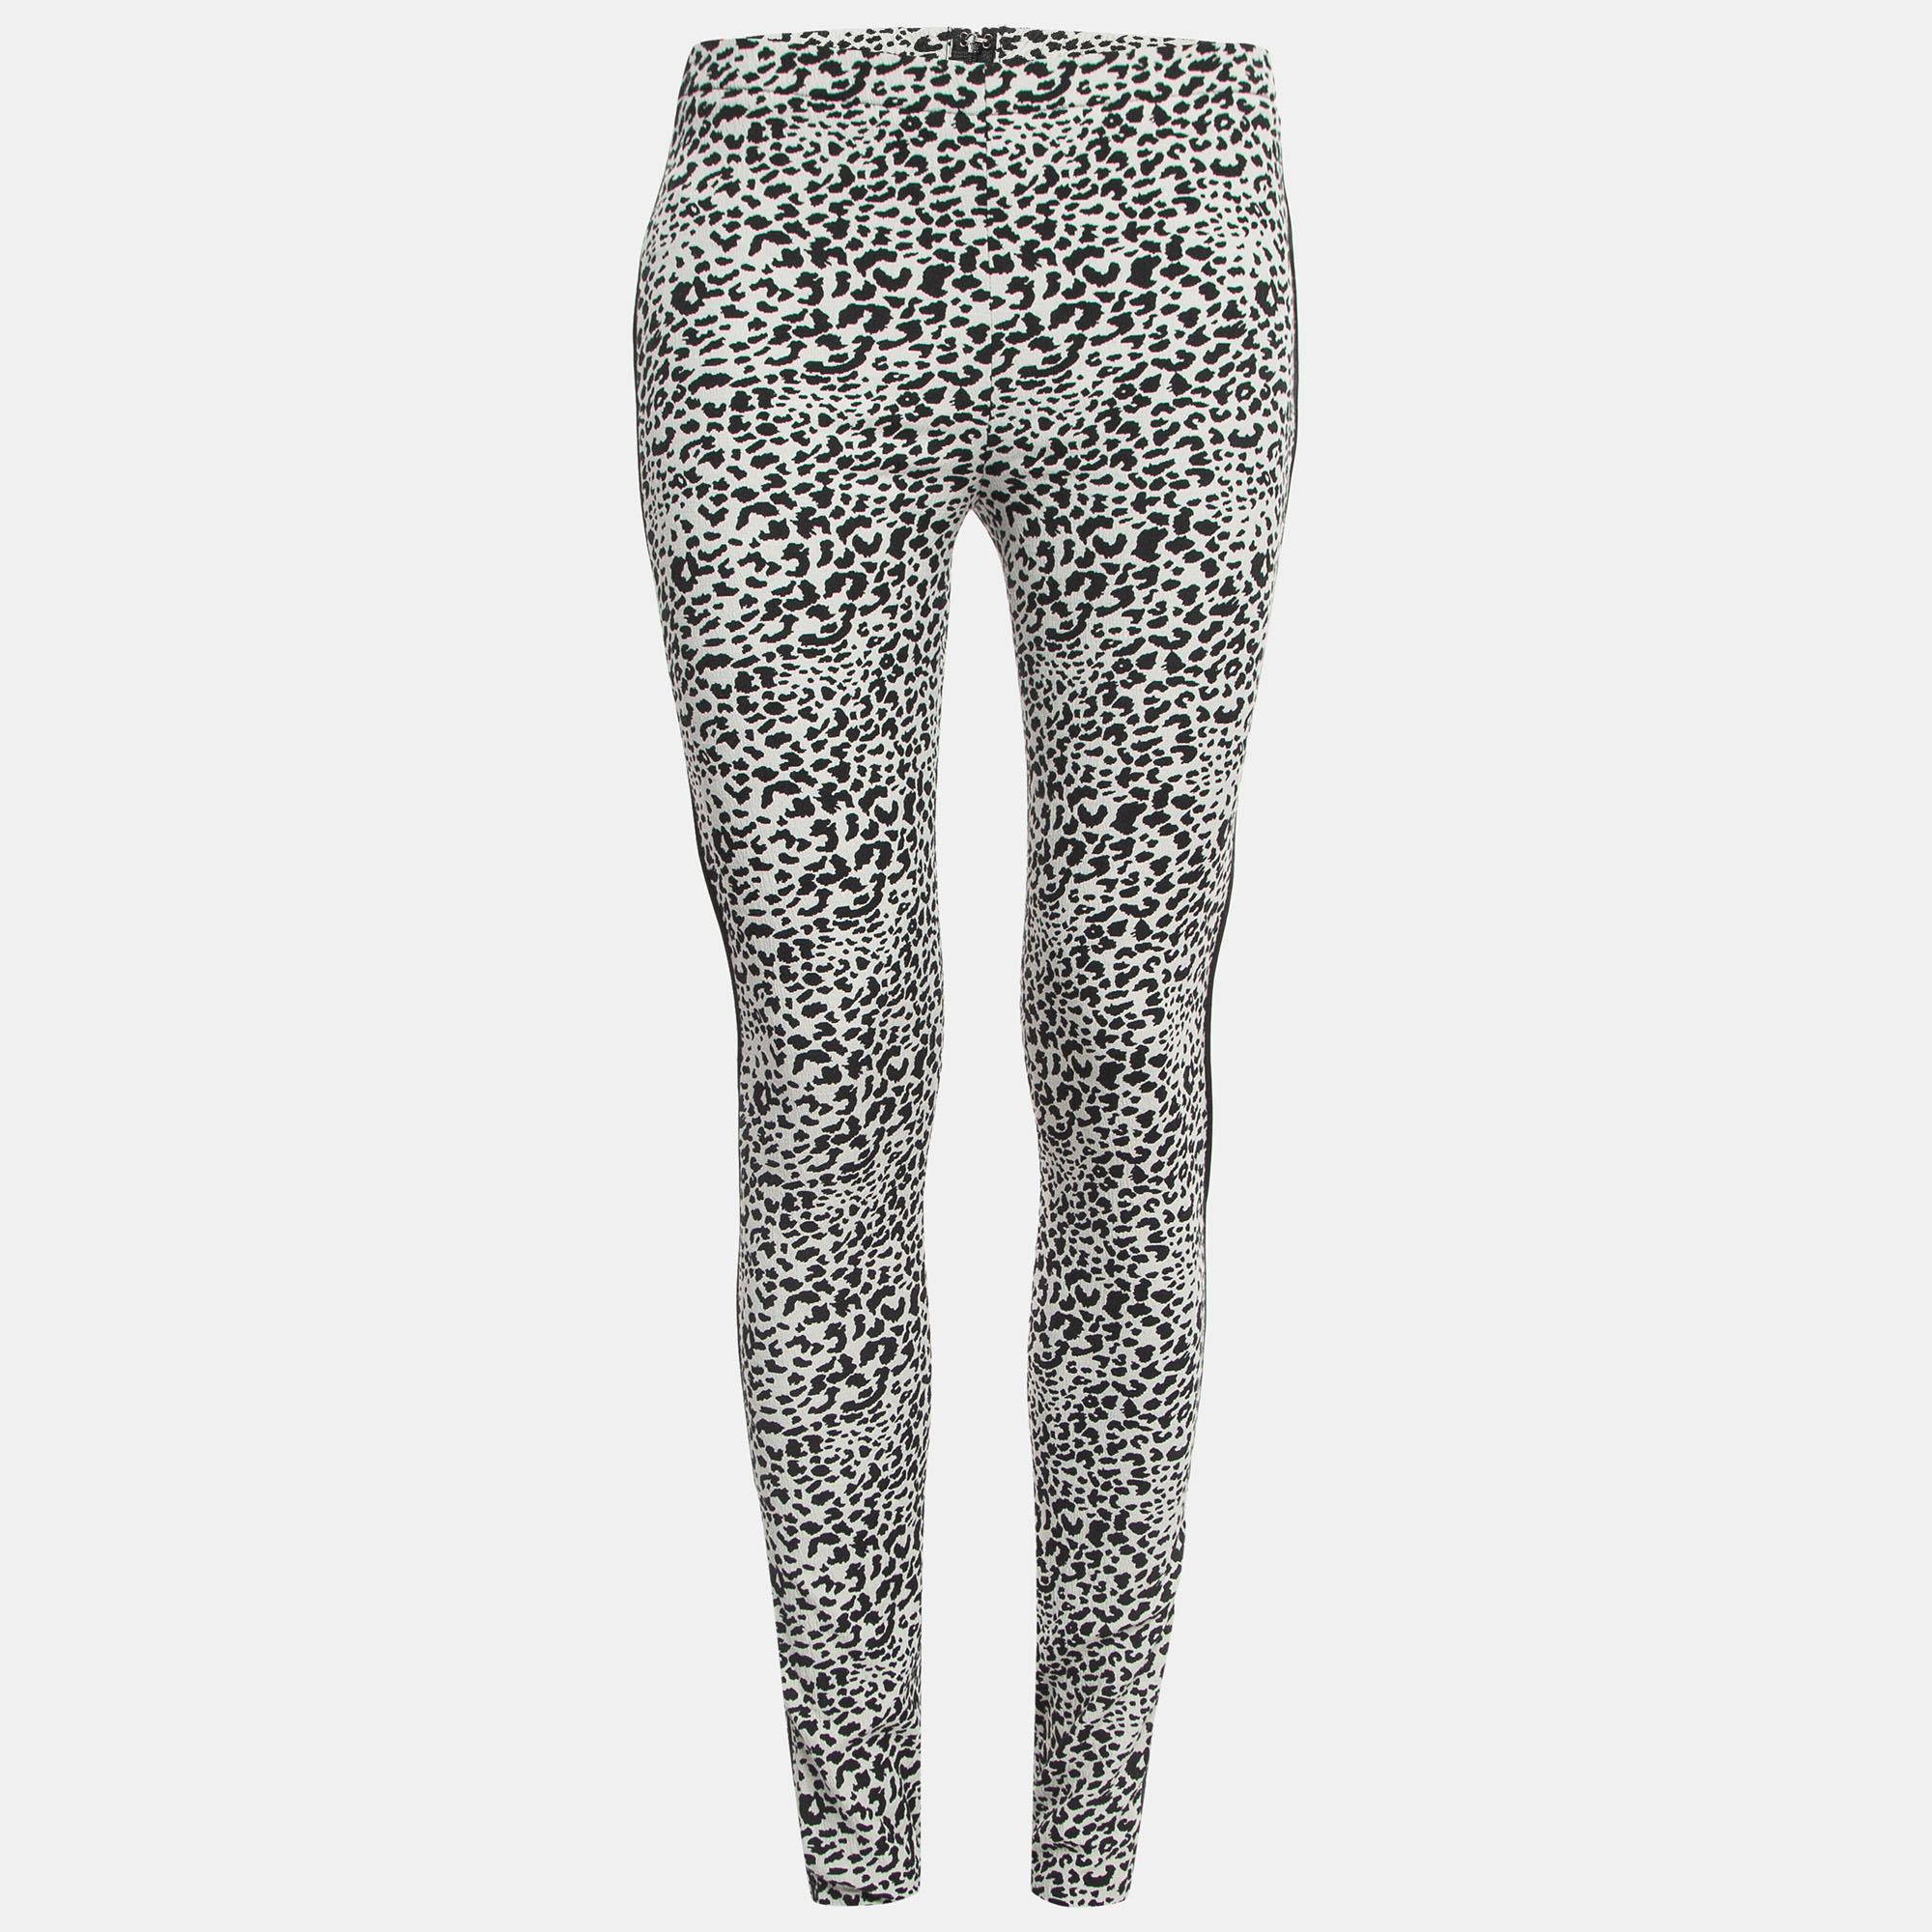 Pre-owned Zadig & Voltaire Black/white Animal Print Cotton Blend Skinny Pants M